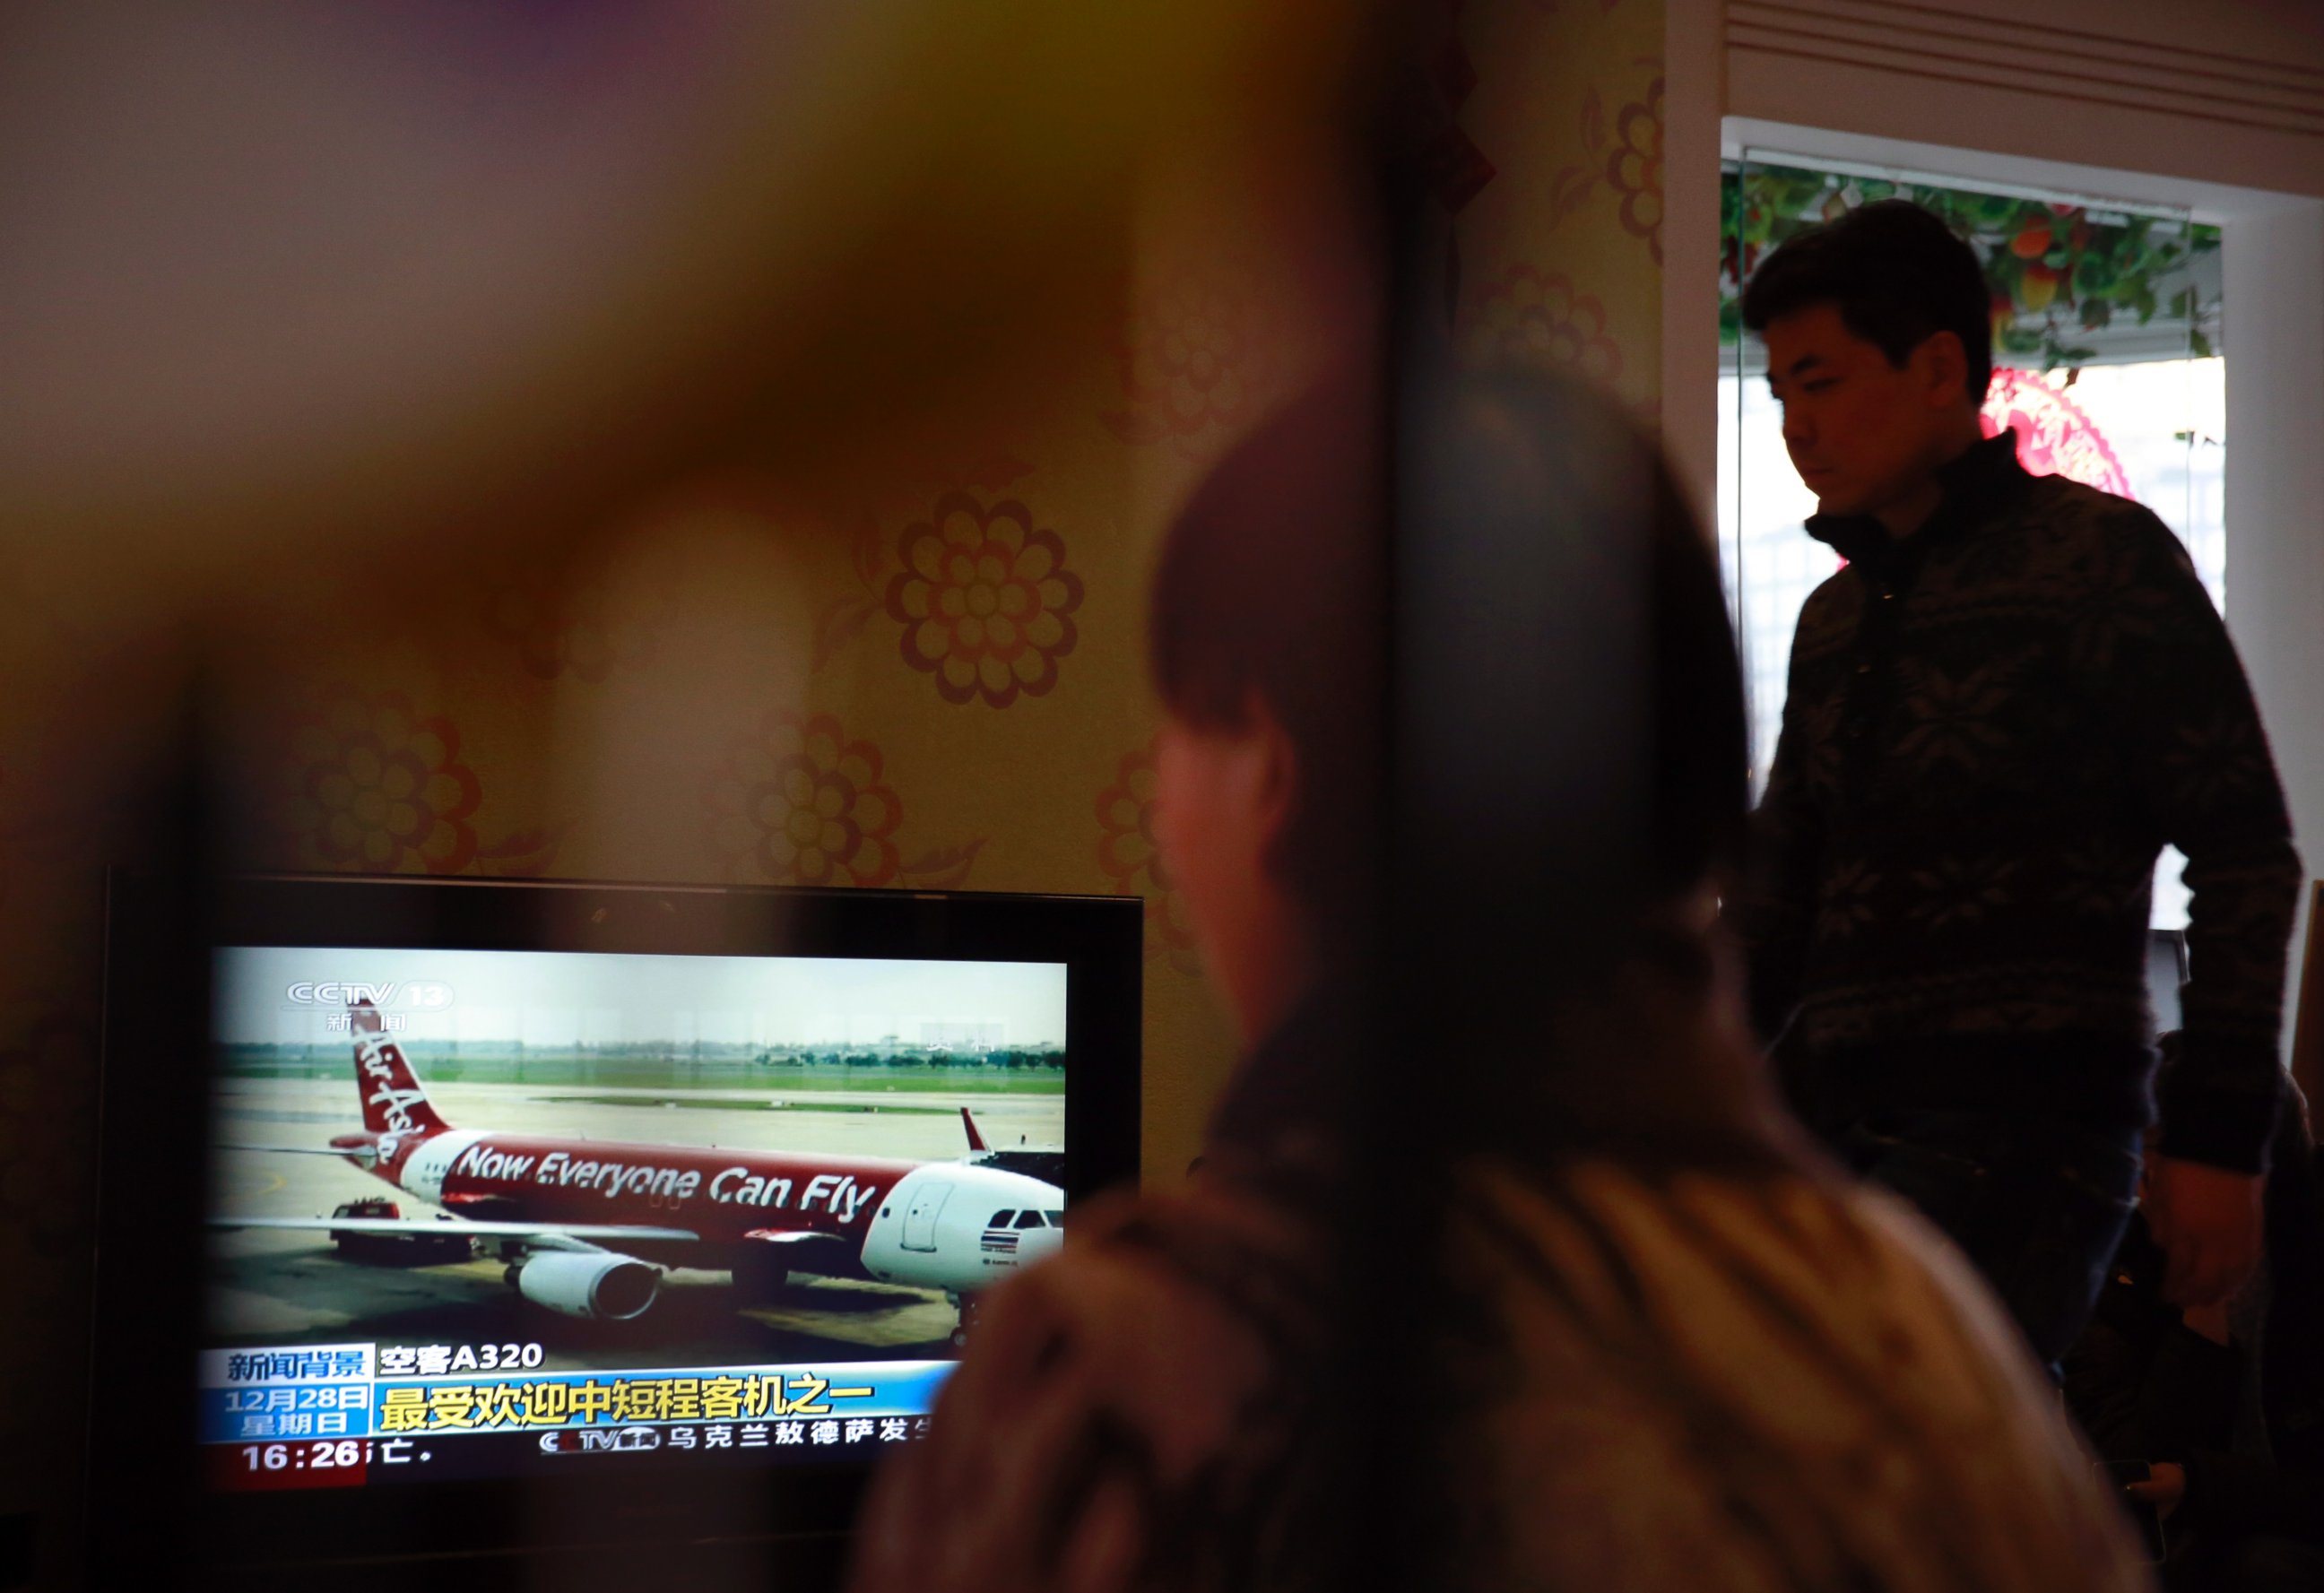 Relatives of passengers onboard the Malaysia Airlines Flight 370 that went missing on March 8, 2014, watch TV news about missing AirAsia flight QZ8501, during their year-end gathering at a house in Beijing, China Sunday, Dec. 28, 2014. 